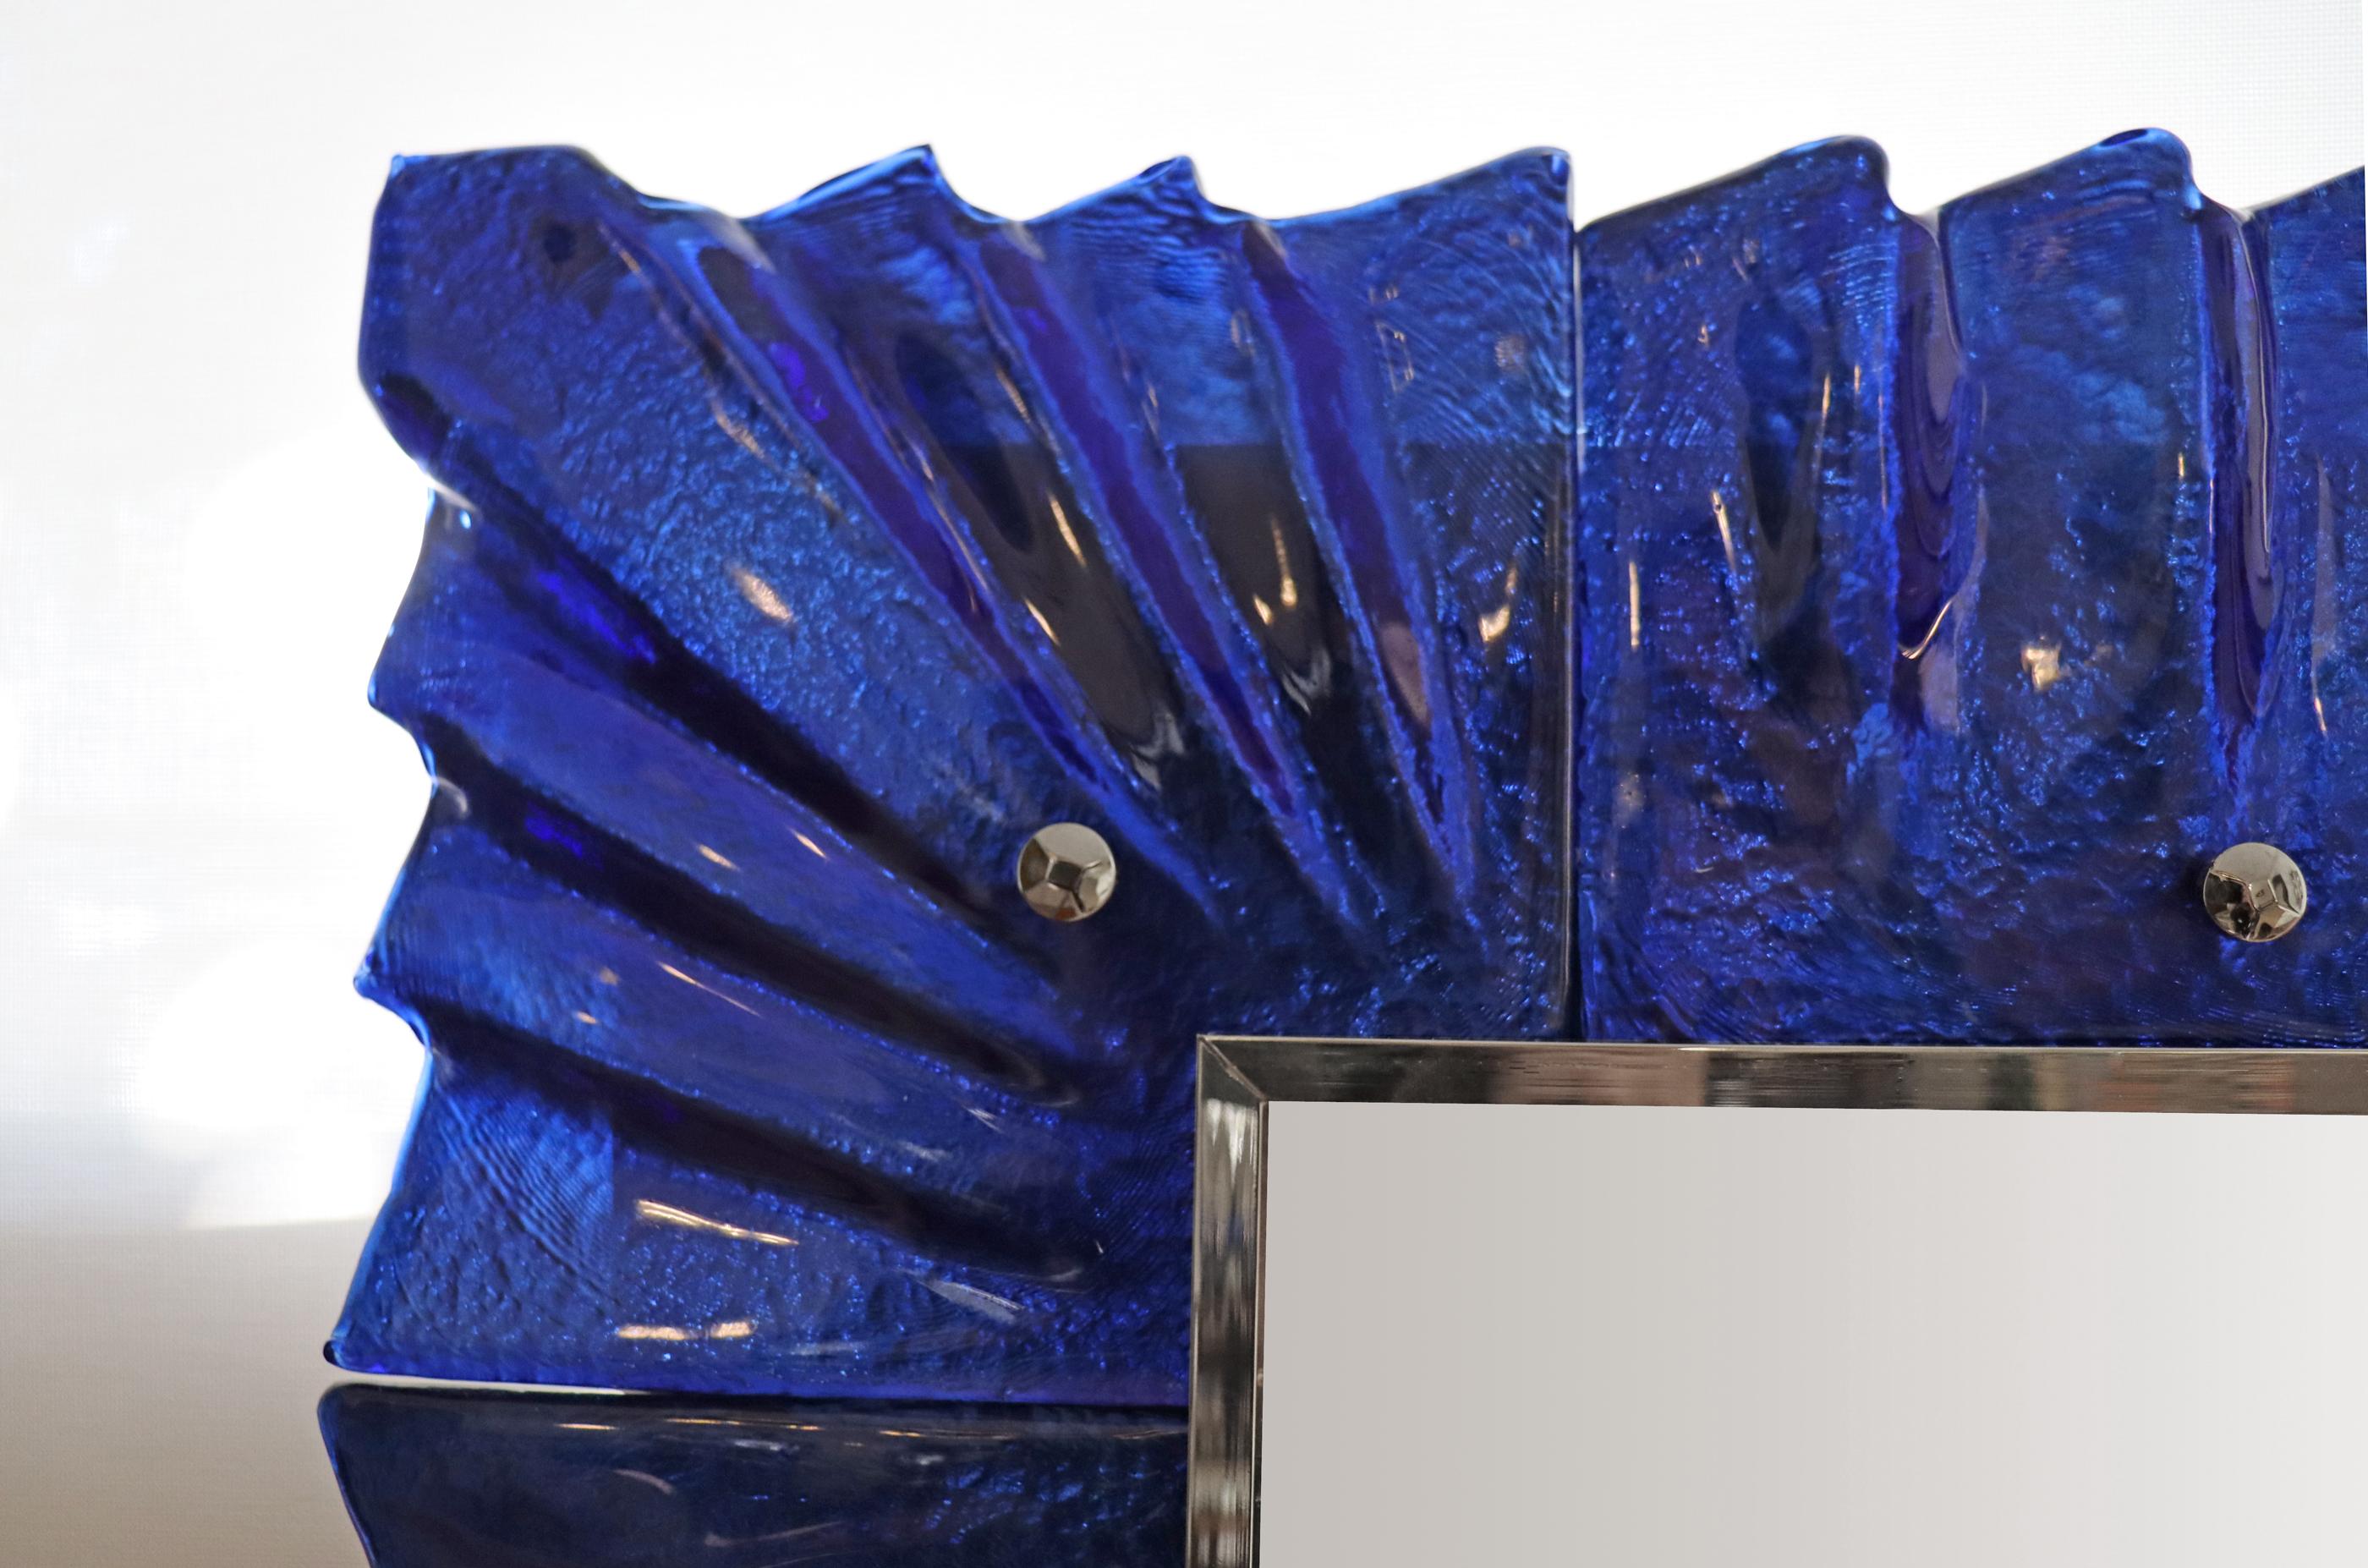 Pair of Murano cobalt blue glass mirror, in stock
Nickel plated cabochon accents.
Glass texture and color are absolutely striking.
Nickel plated surrounding gallery
Can be hung vertical or horizontal.
Pair available now
Located in our store in